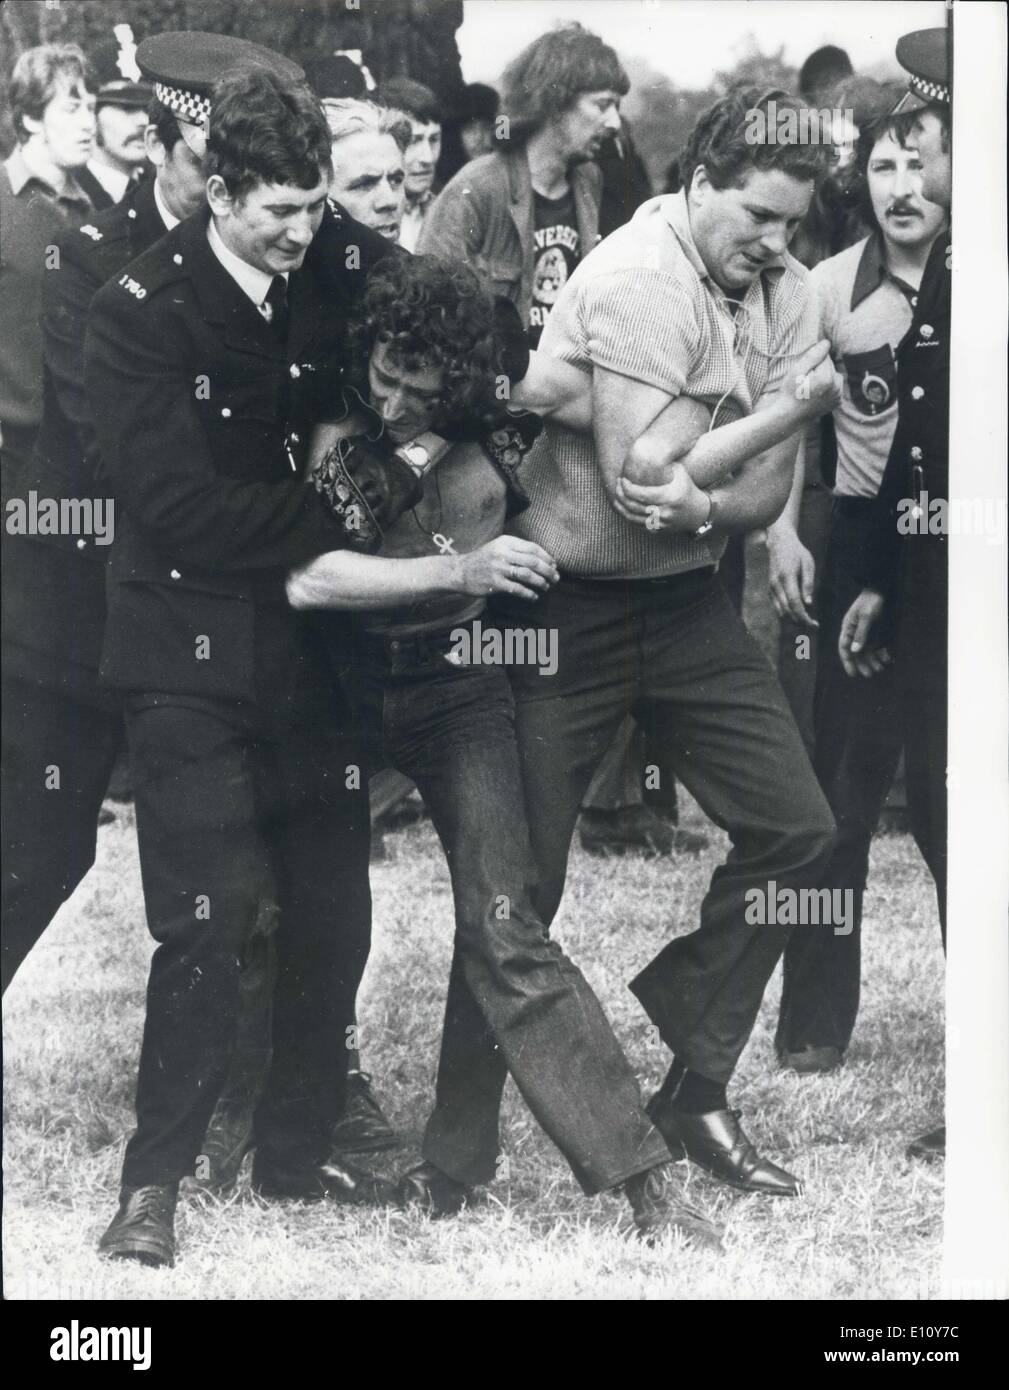 Aug. 30, 1974 - 600 Police Clash with Pop Fans In A ''Clear Out'' Raid AT Windsor Great Park: More than 600 police swooped on 2,000 hippies at the Windsor Great Park Pop Festival and ordered them to ''Pack up their tents and go''. Some obeyed the order, but many of them resisted. A scene of hysteria broke out following the c;ash between the police and the pop fans. Many people were injured, including policemen, and many arrest were made. Photo shows Police Struggle with a pop fan during yesterday's clash in Windsor Great Park. Stock Photo